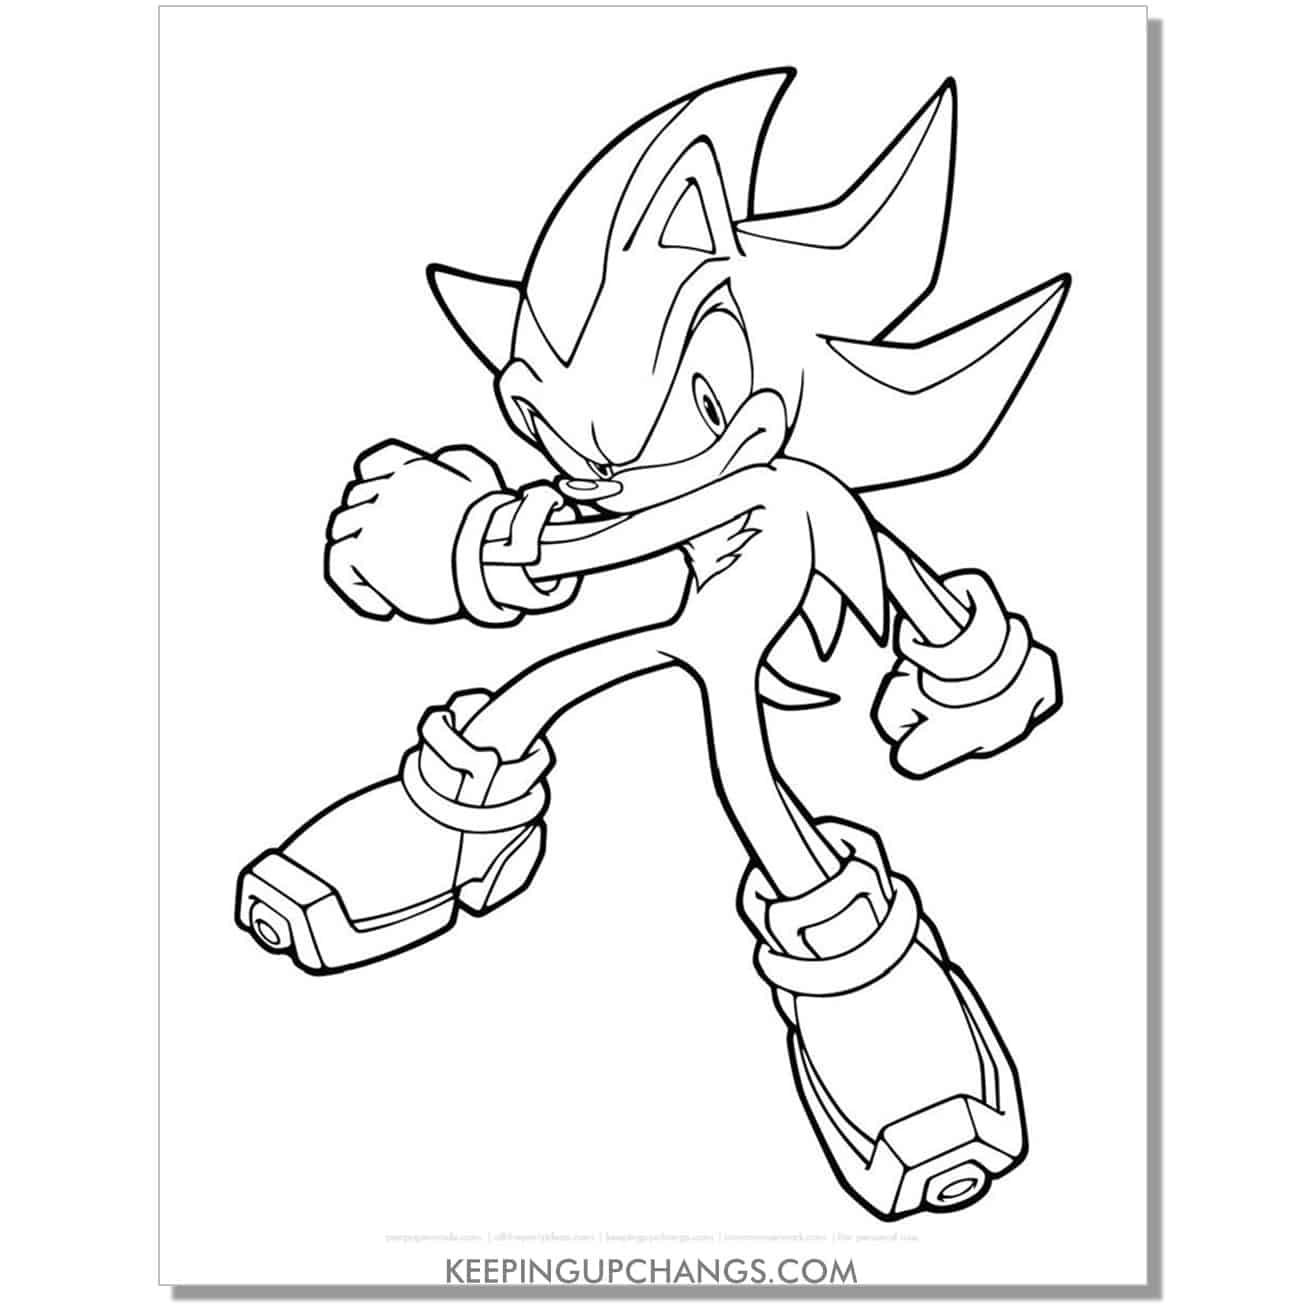 shadow sonic facing forward with arms twisted to side coloring page.